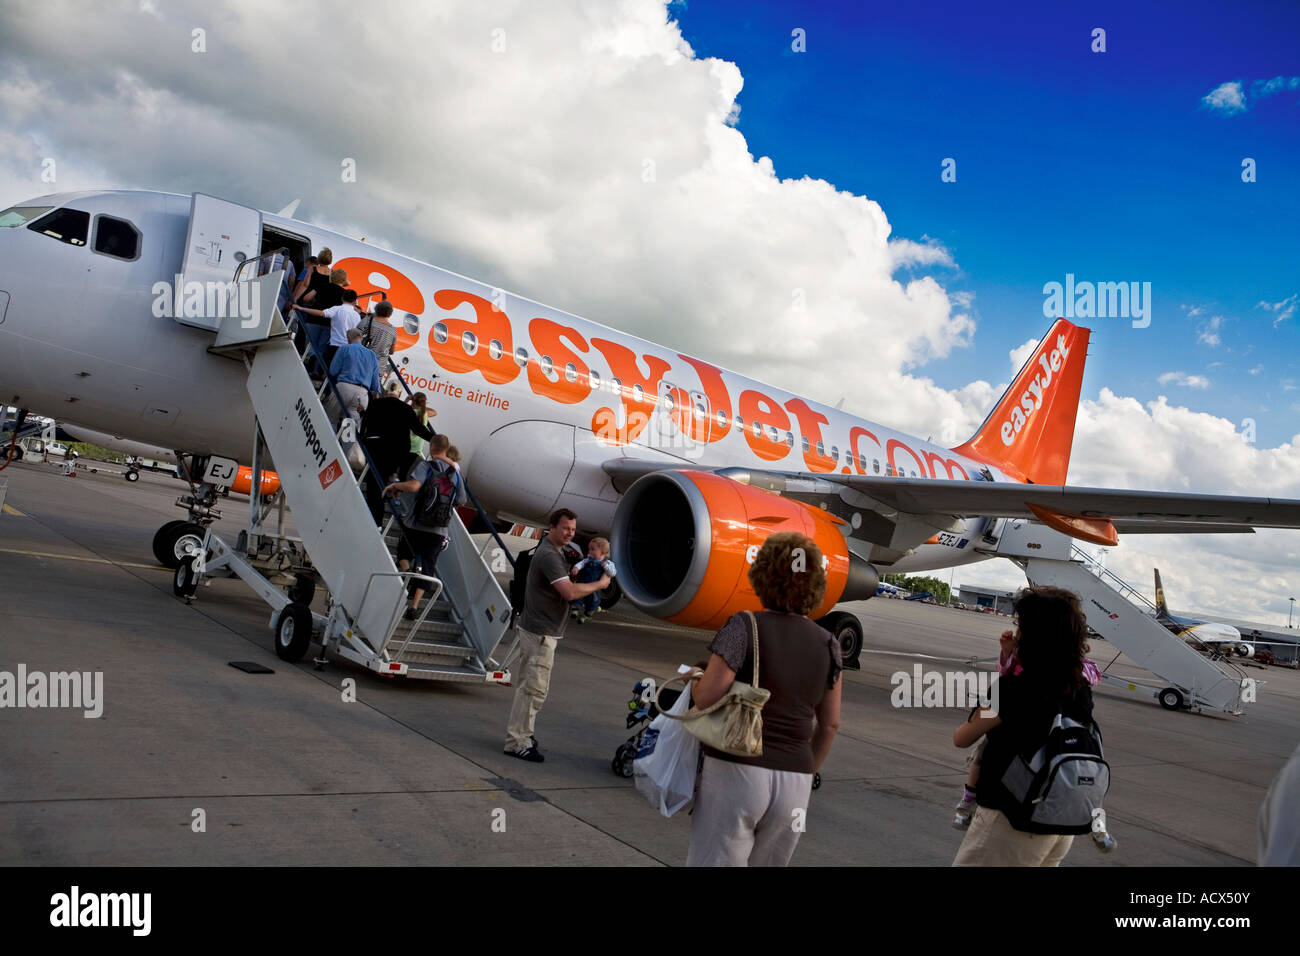 Easyjet plane on the runway at Stansted runway Stock Photo